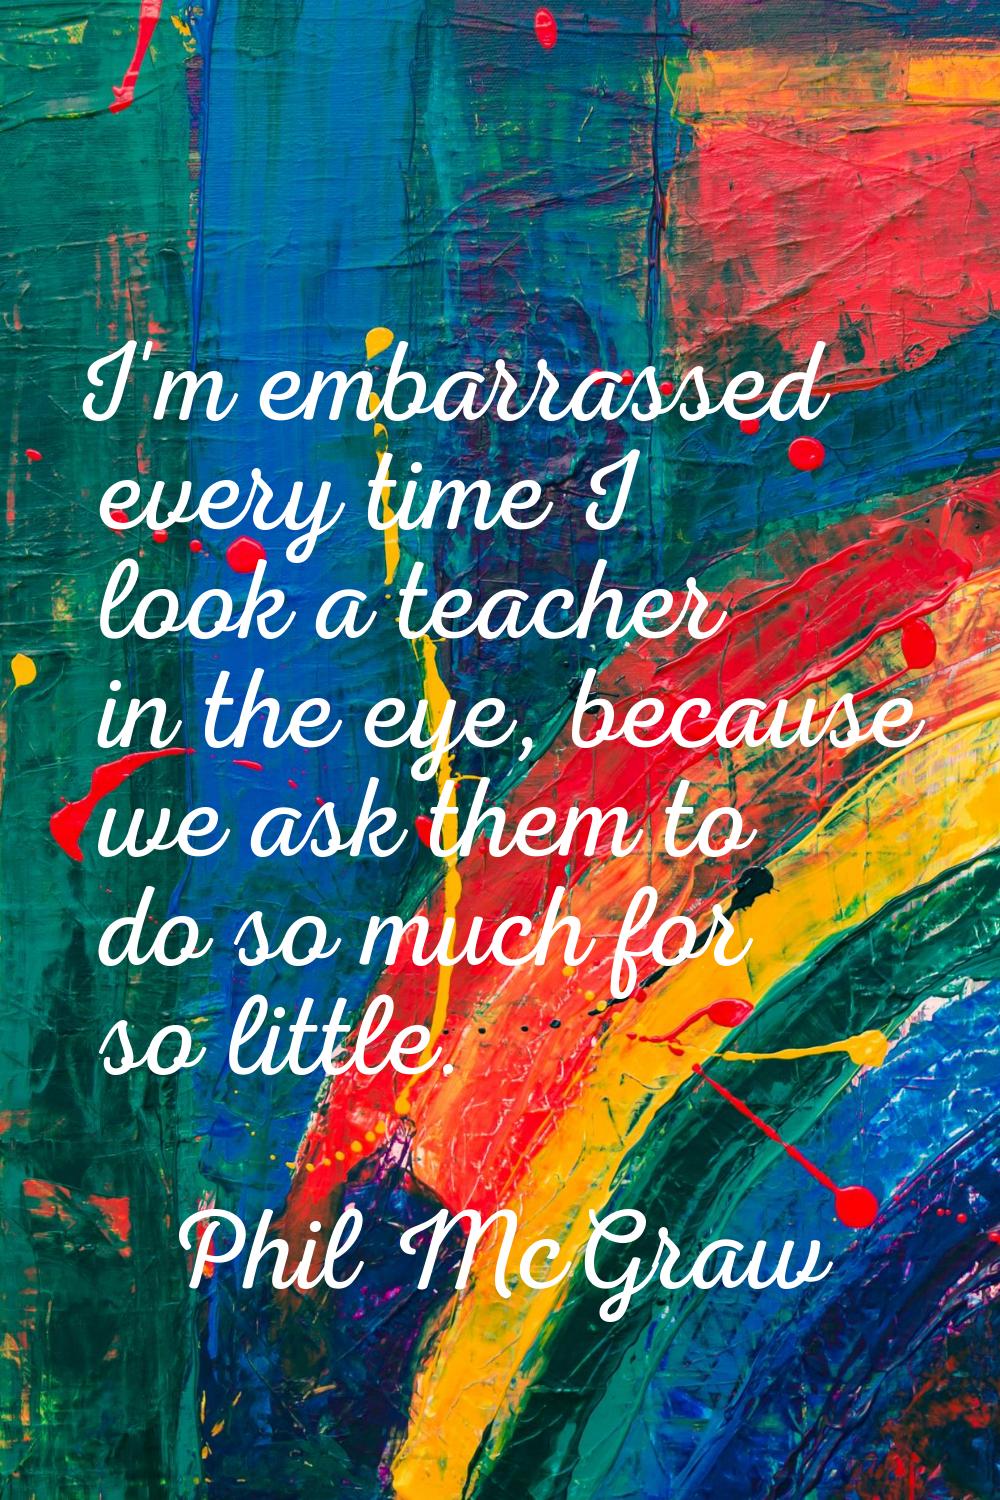 I'm embarrassed every time I look a teacher in the eye, because we ask them to do so much for so li